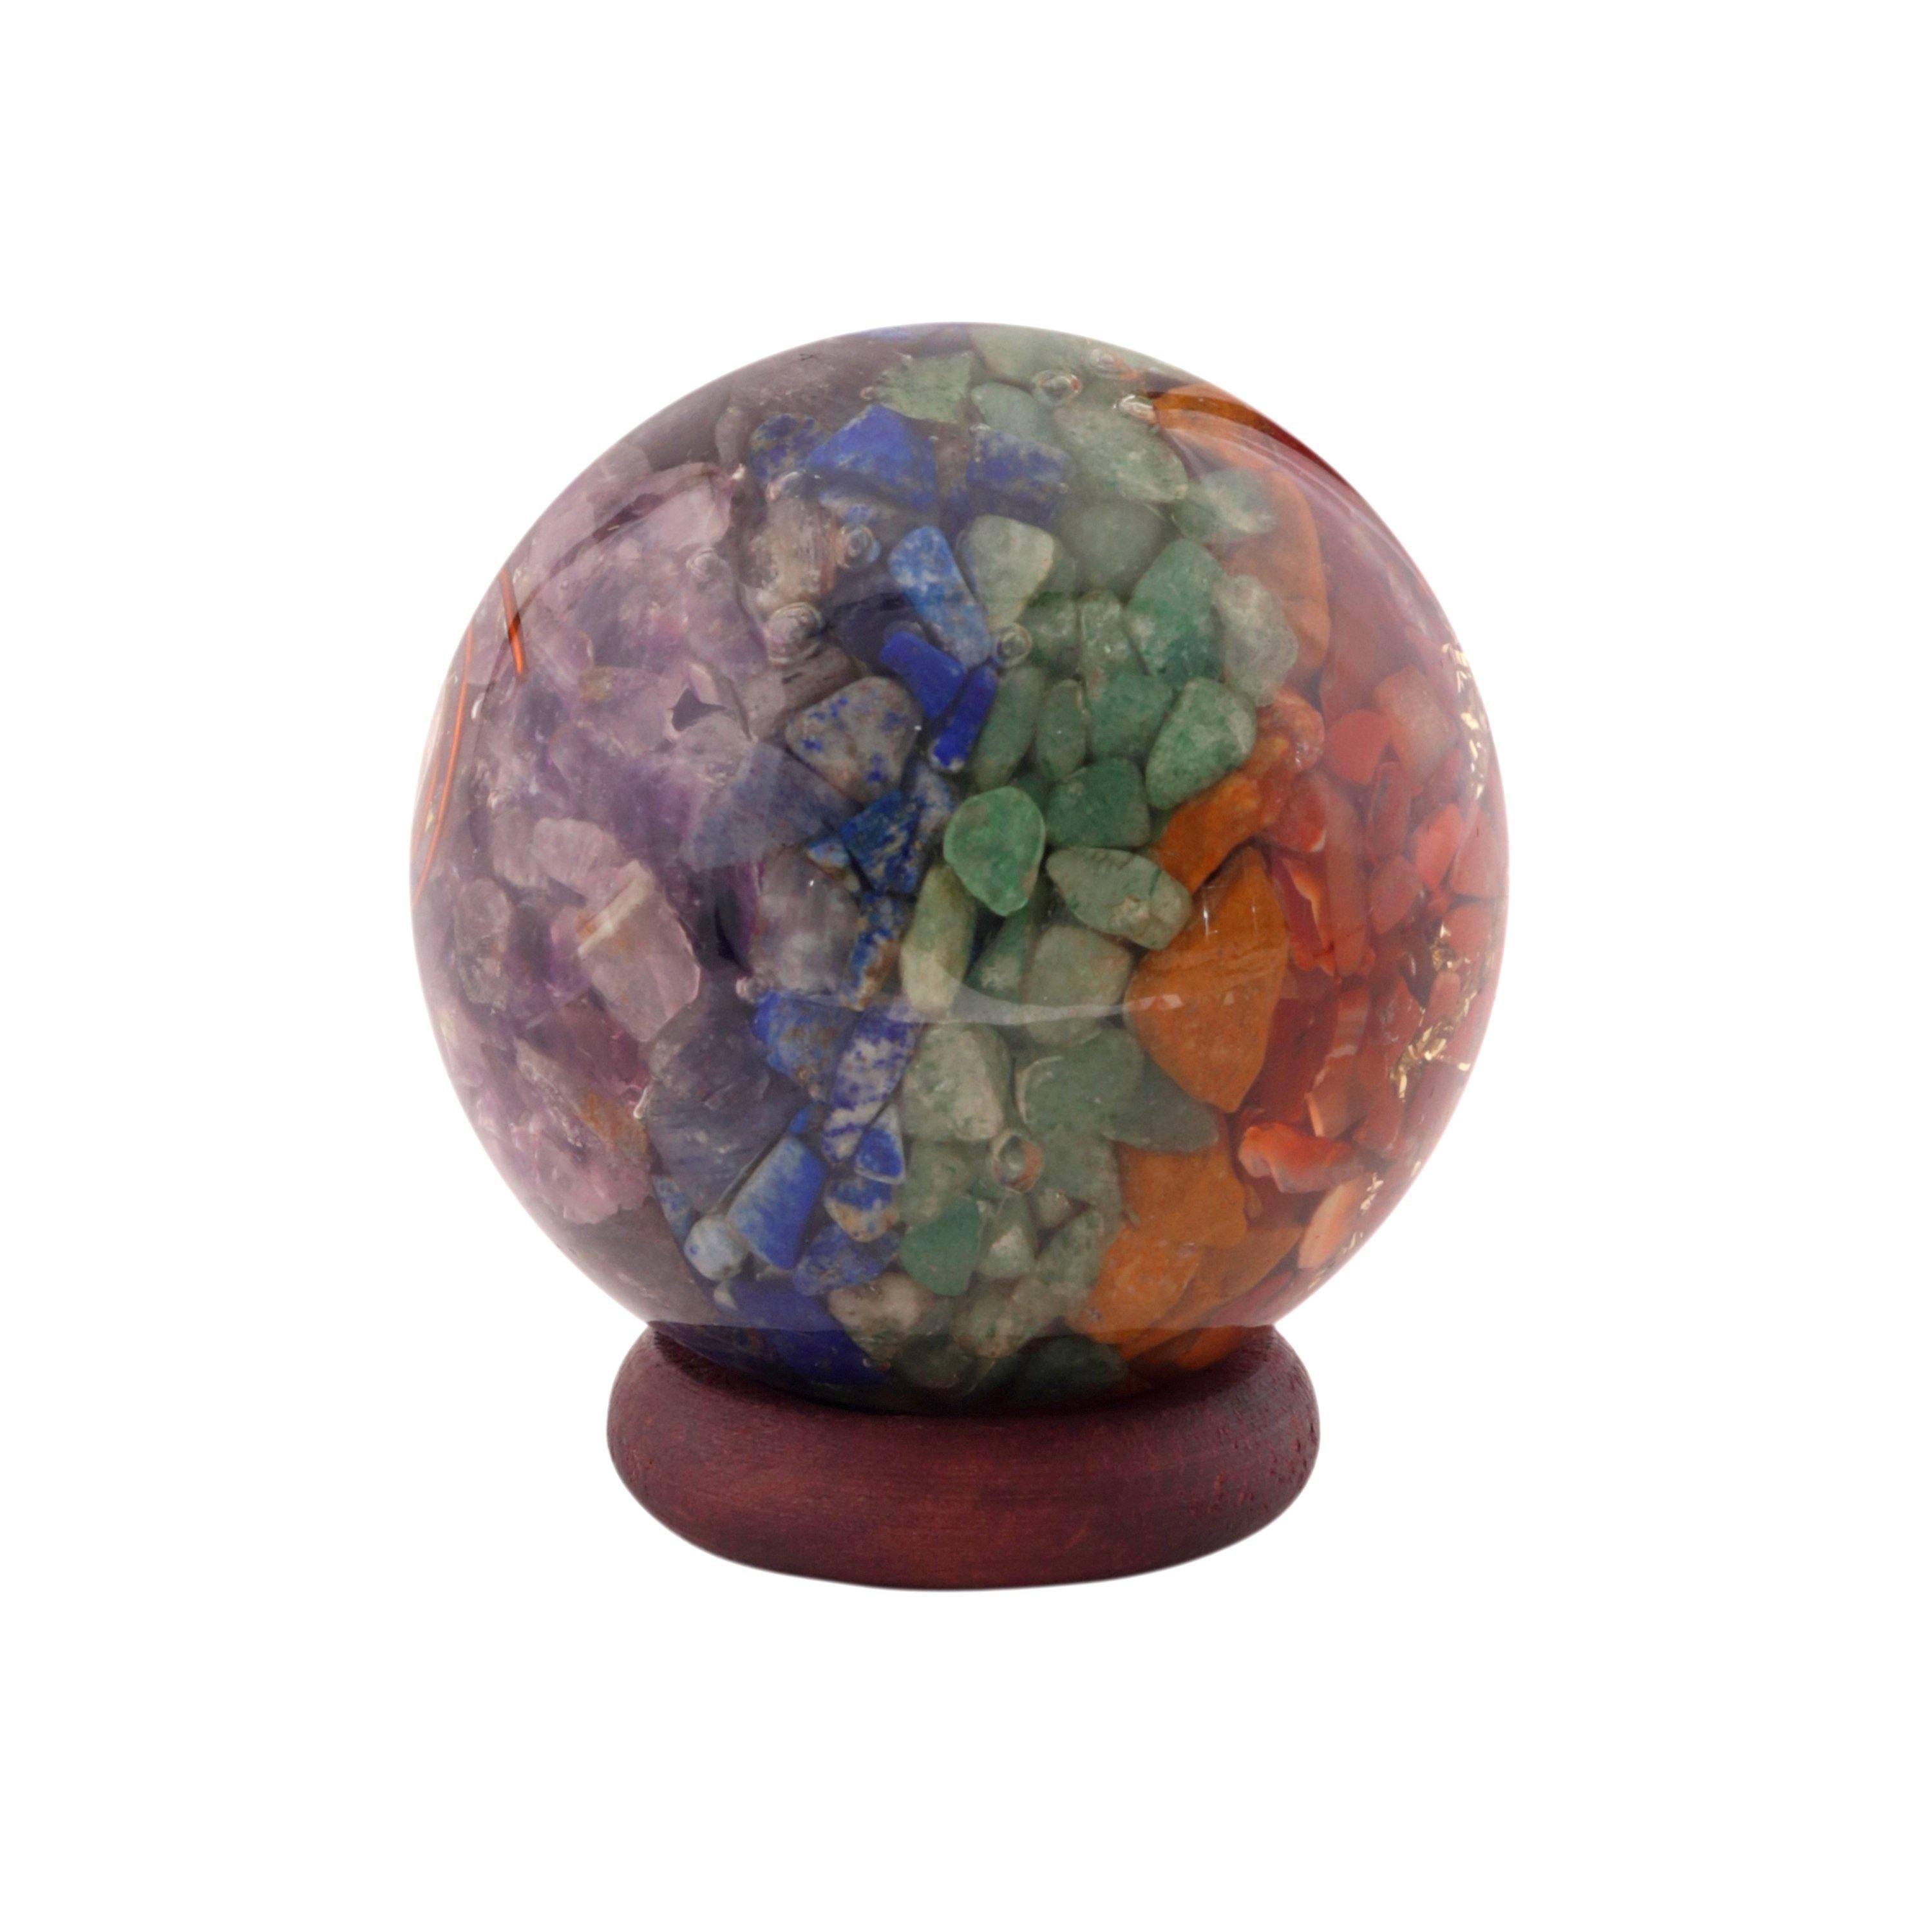 Healing Crystals - Seven Chakra Orgone Layer Sphere 1 Kg Lot